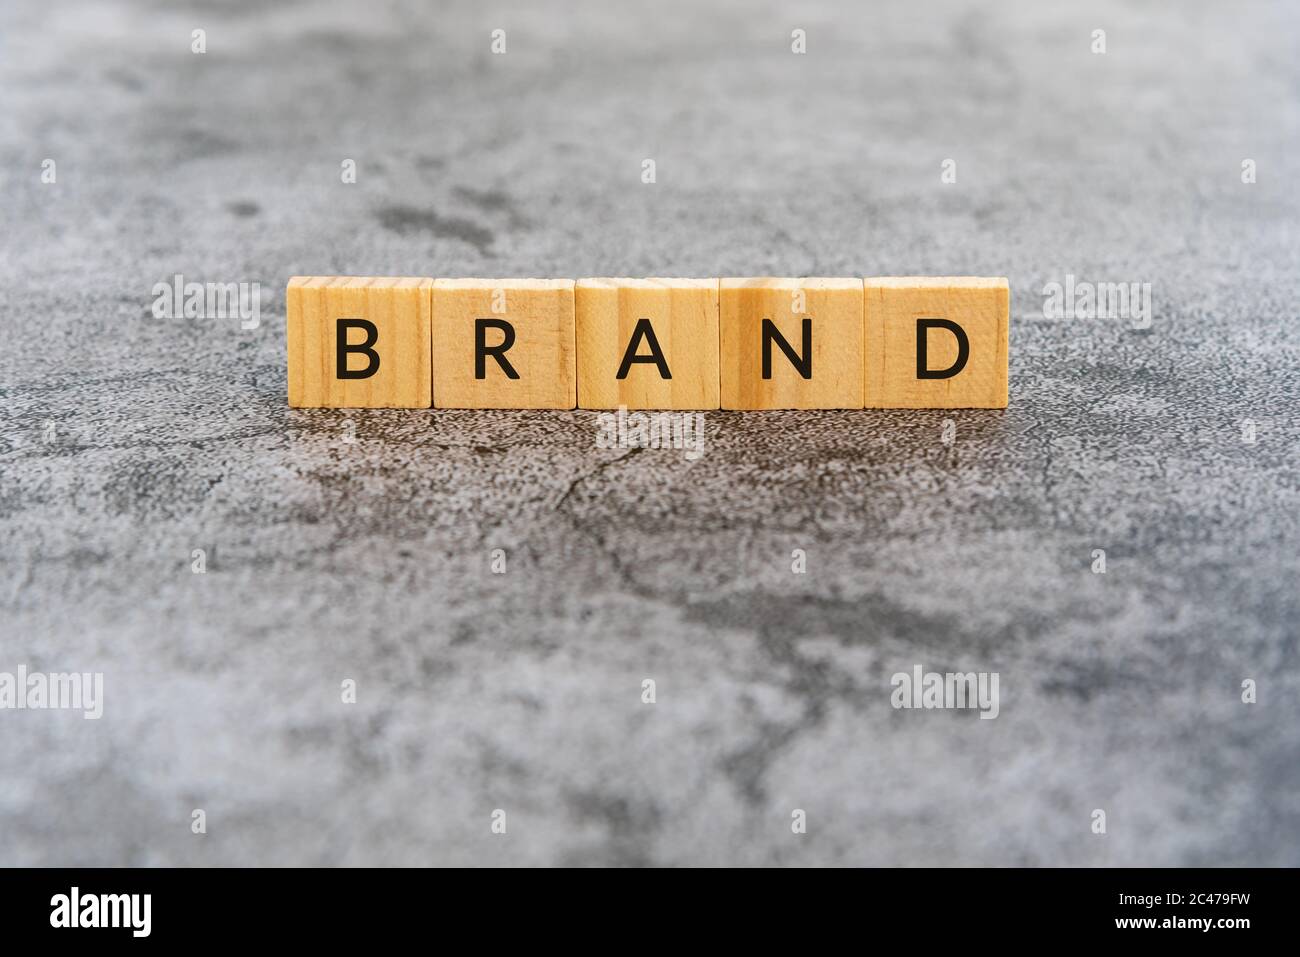 Brand text on wooden block textures background Stock Photo